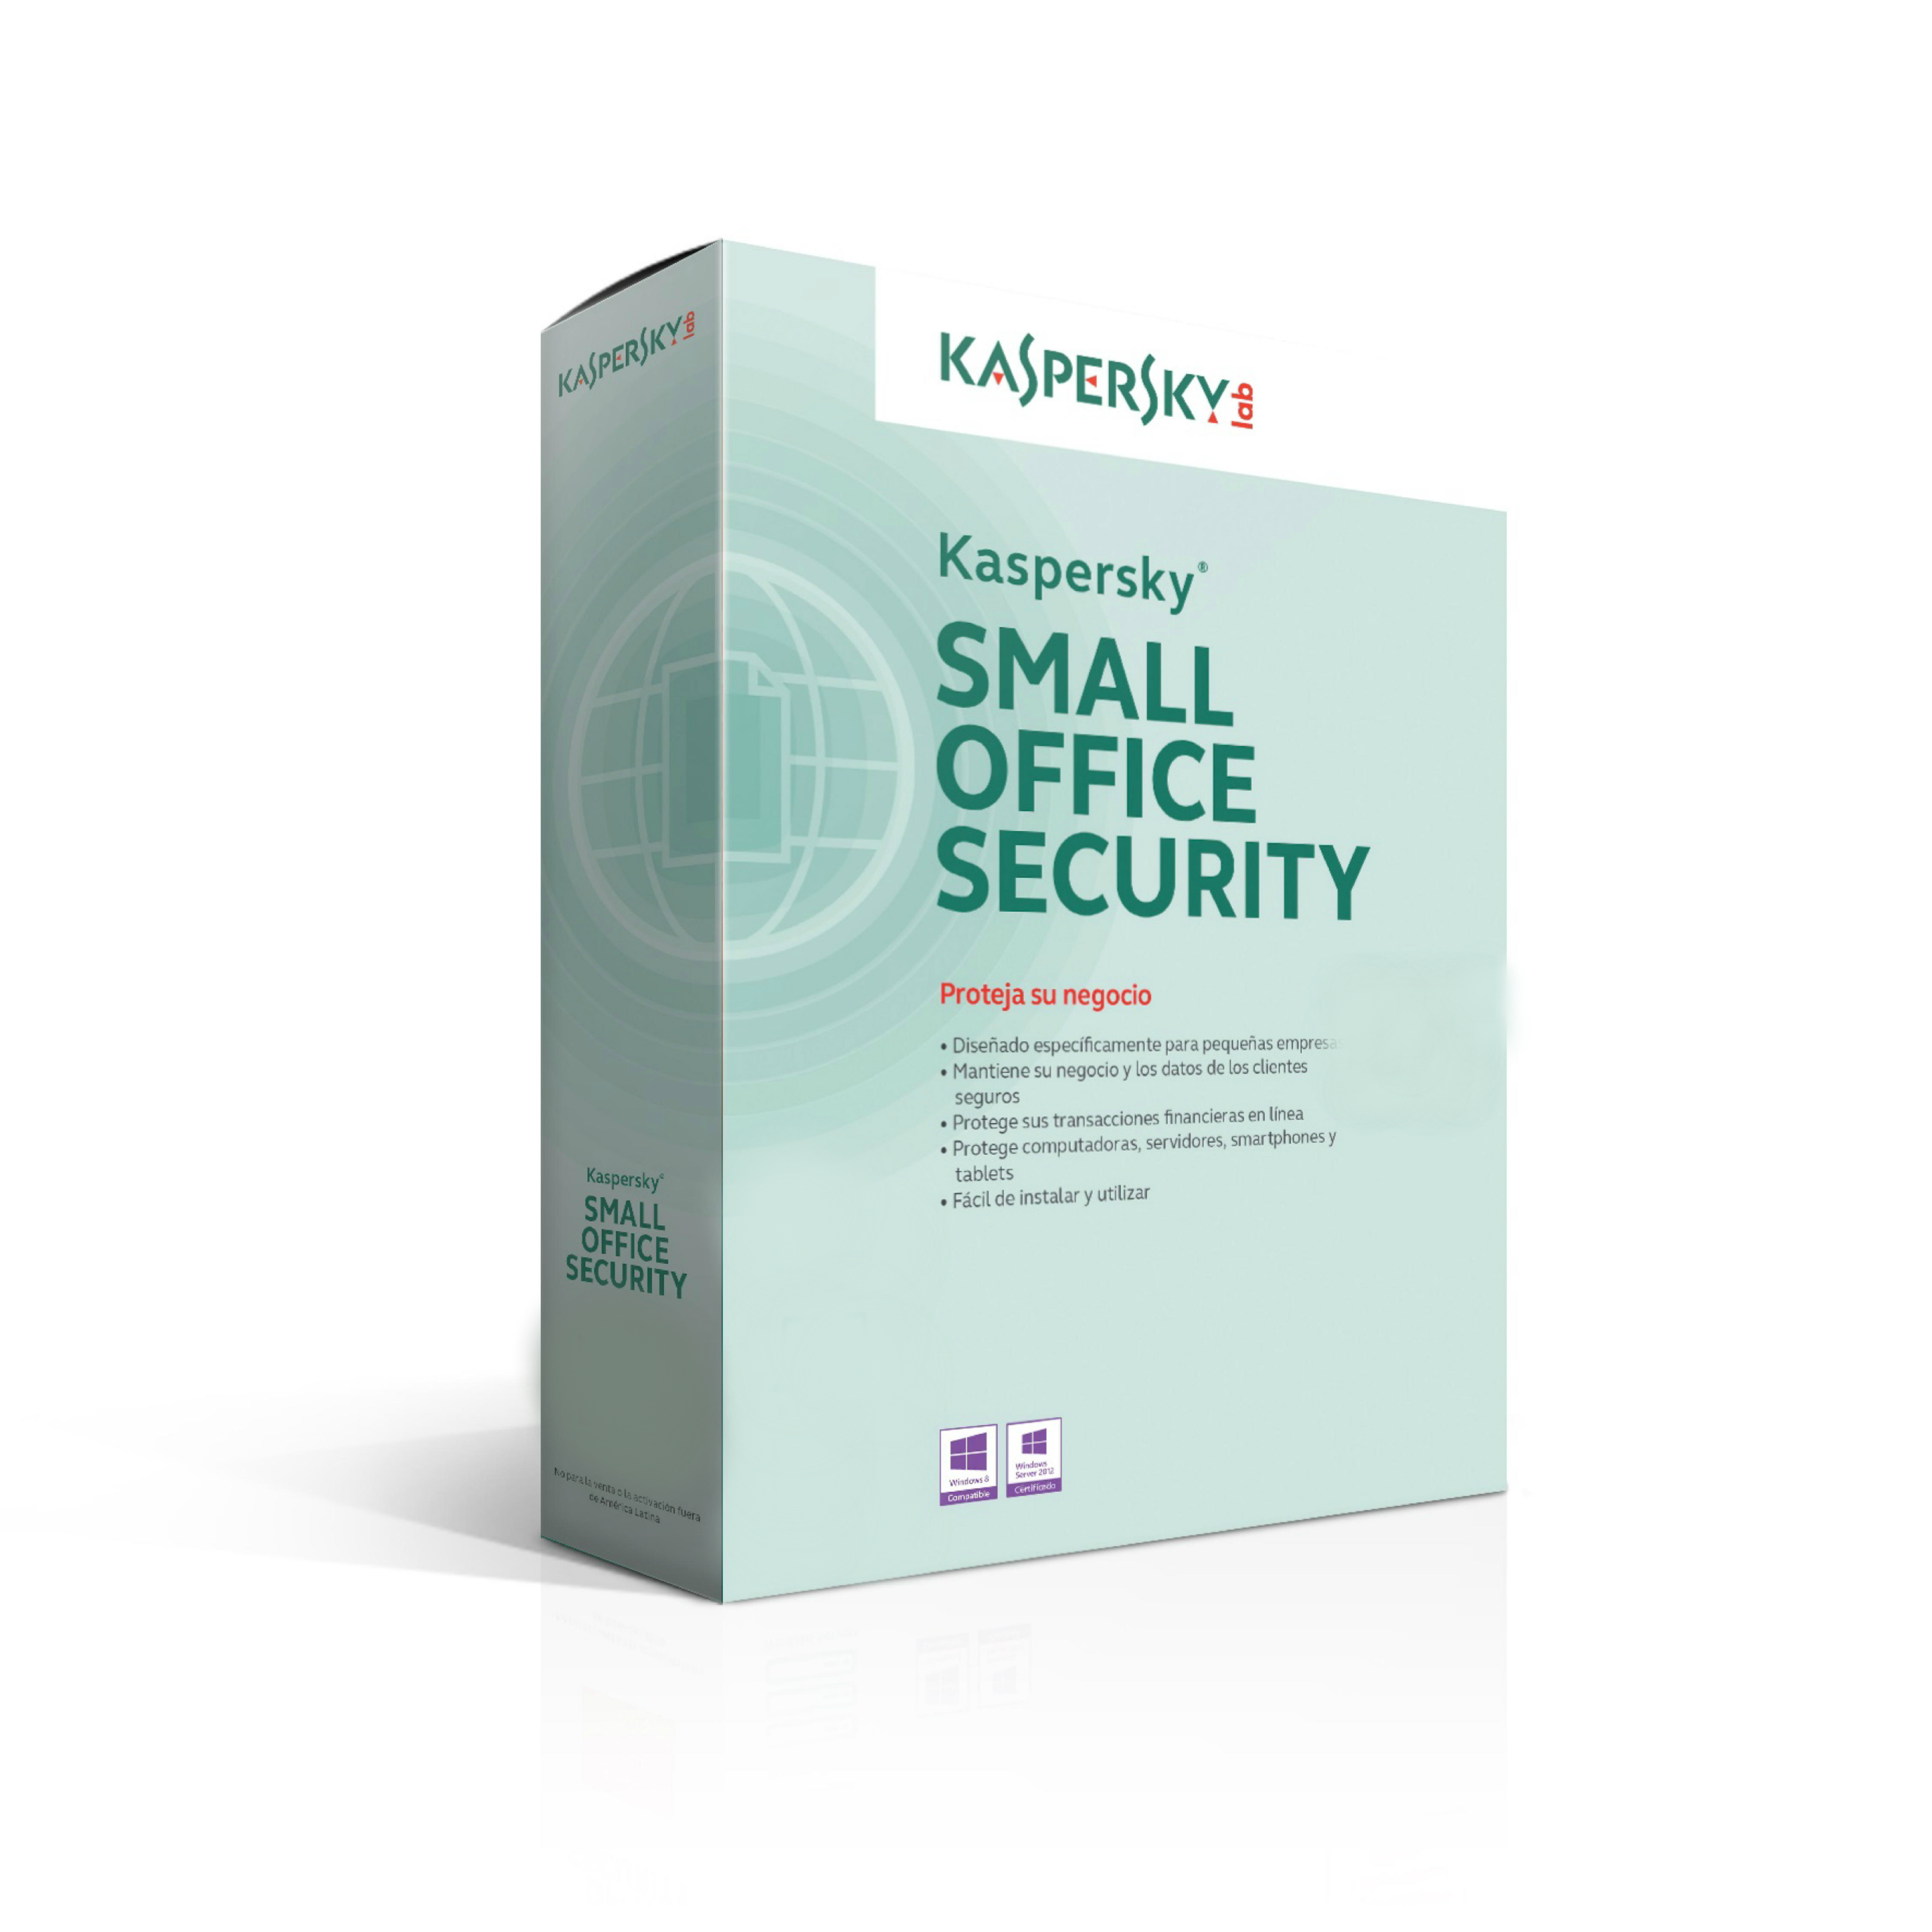 KASPERSKY SMALL OFFICE SECURITY 1 SERVER + 10 PC + 10 MD 3 YIL